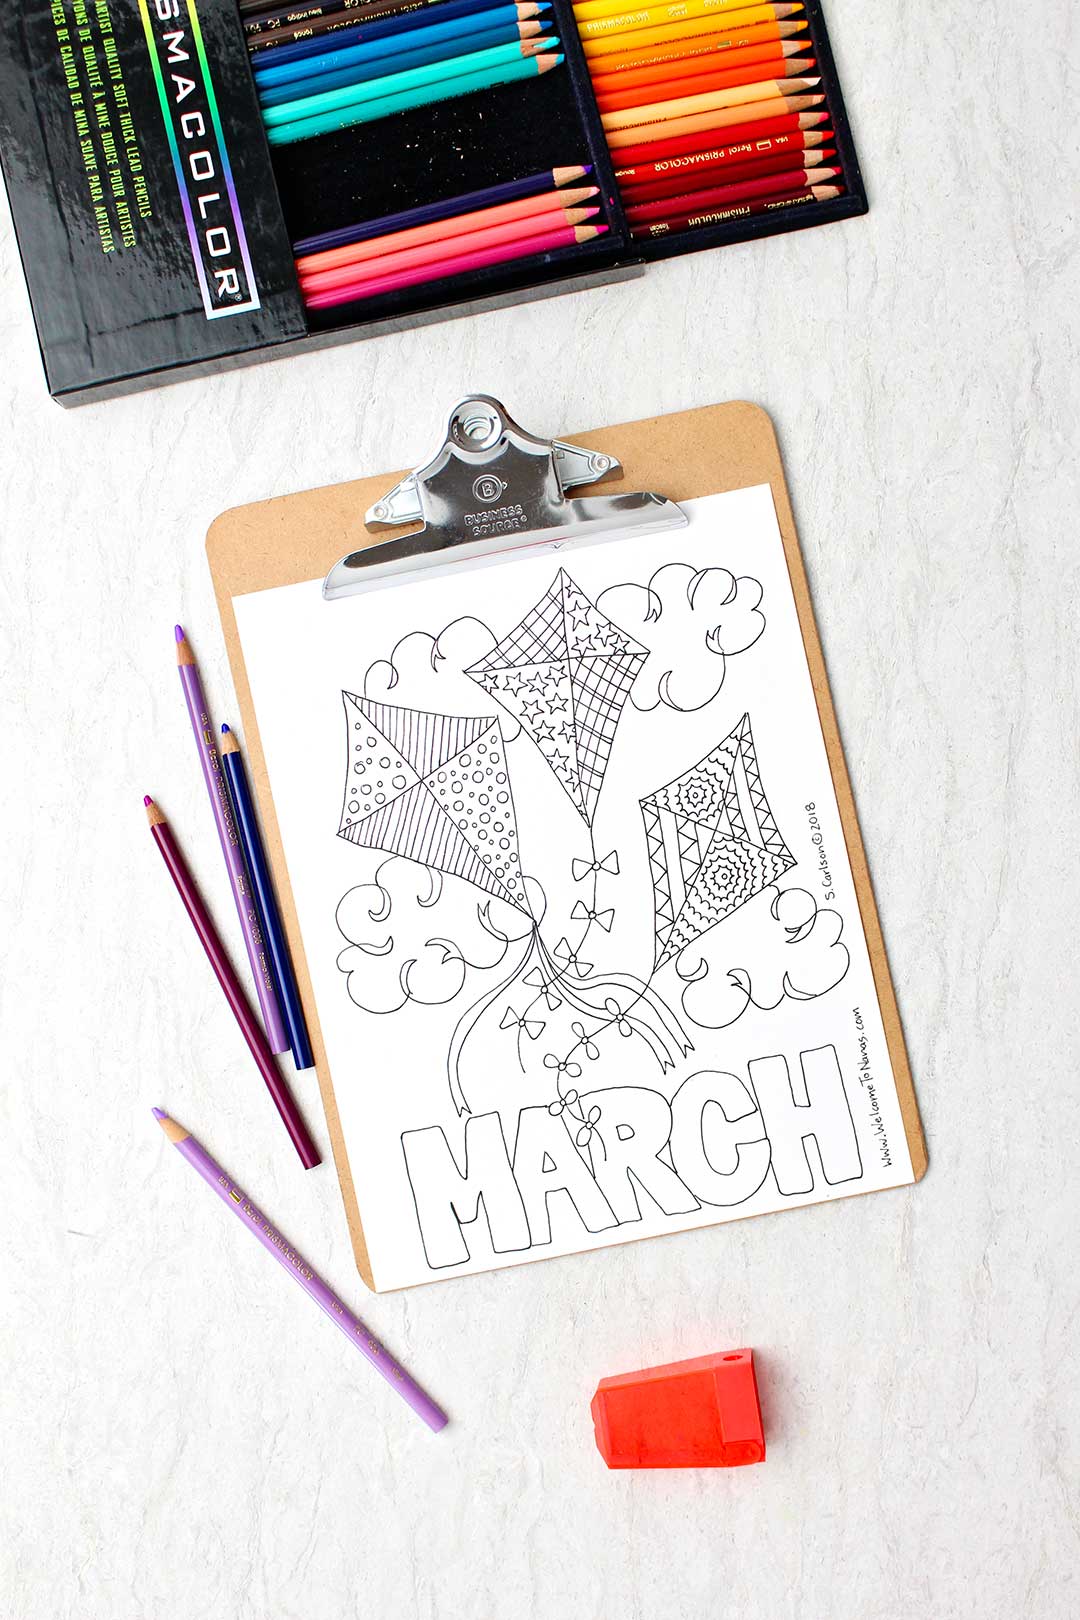 An uncolored March coloring page on a clip board with colored pencils near by. The page is a picture of three patterned kites in the sky with the word "March" at the bottom.